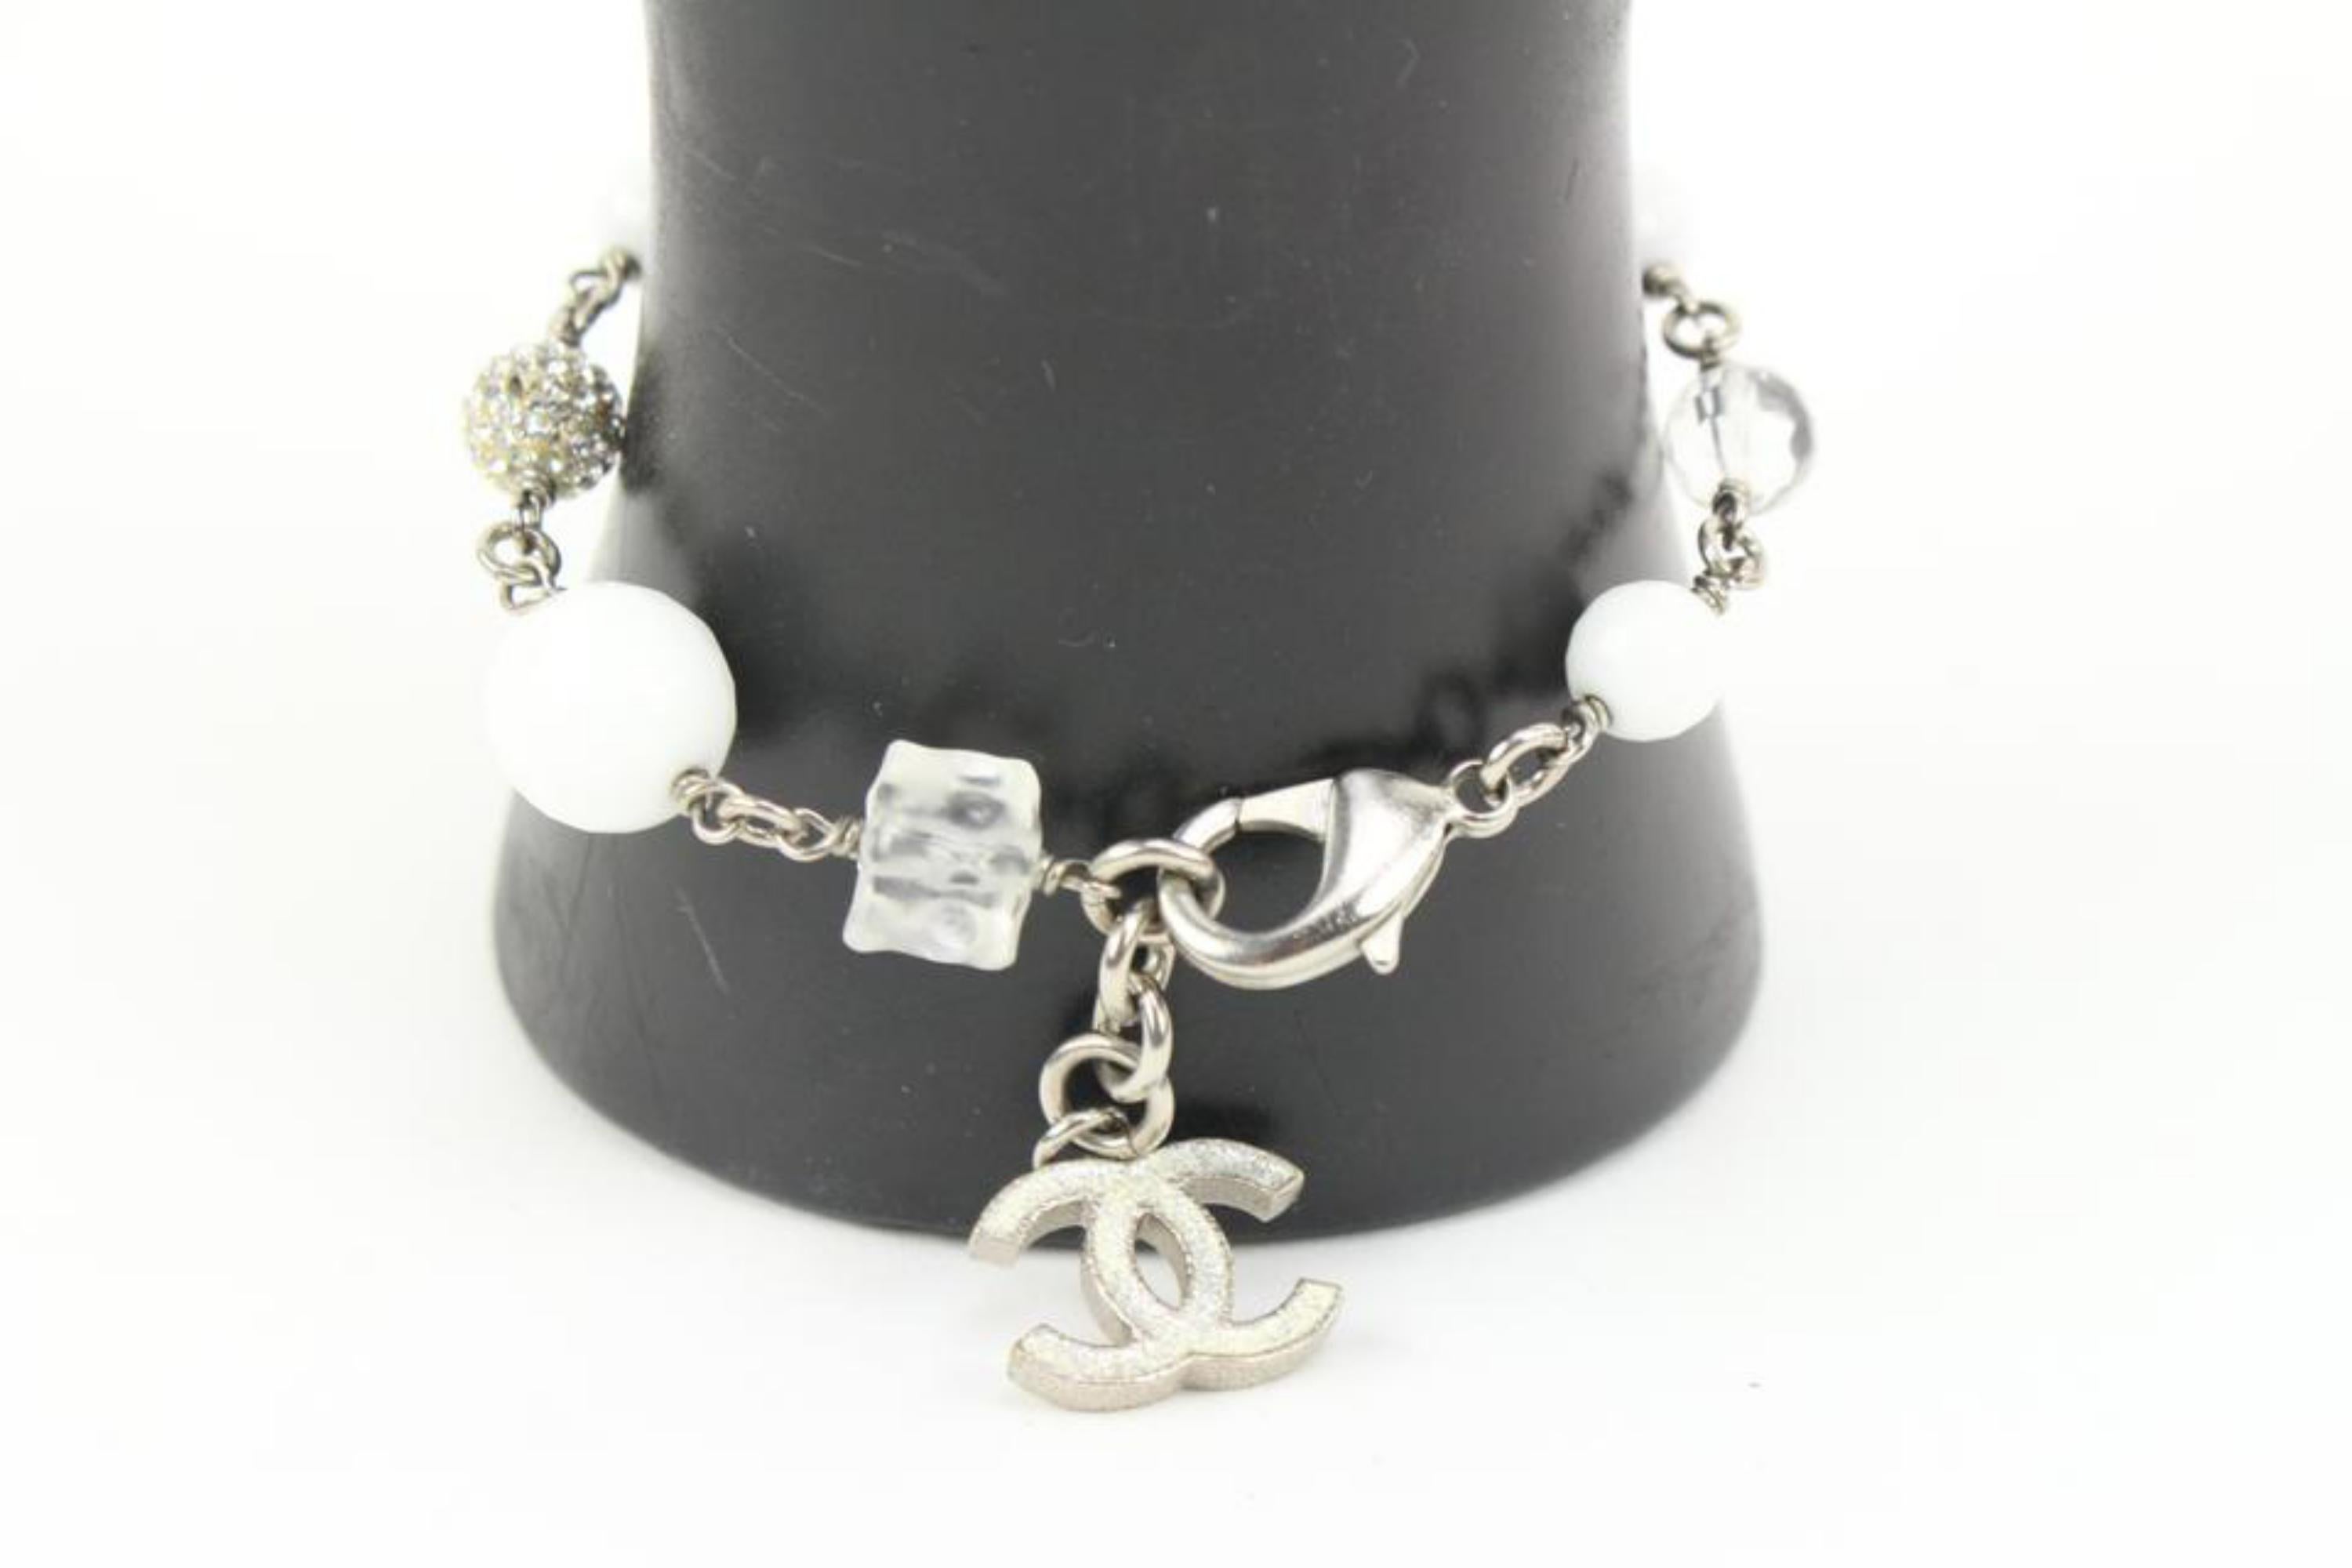 Chanel 10A Crystal x Cube x Pearl Silver Chain Bracelet 14ck311s
Date Code/Serial Number: B10 A
Made In: Italy
Measurements: Length:  8.5